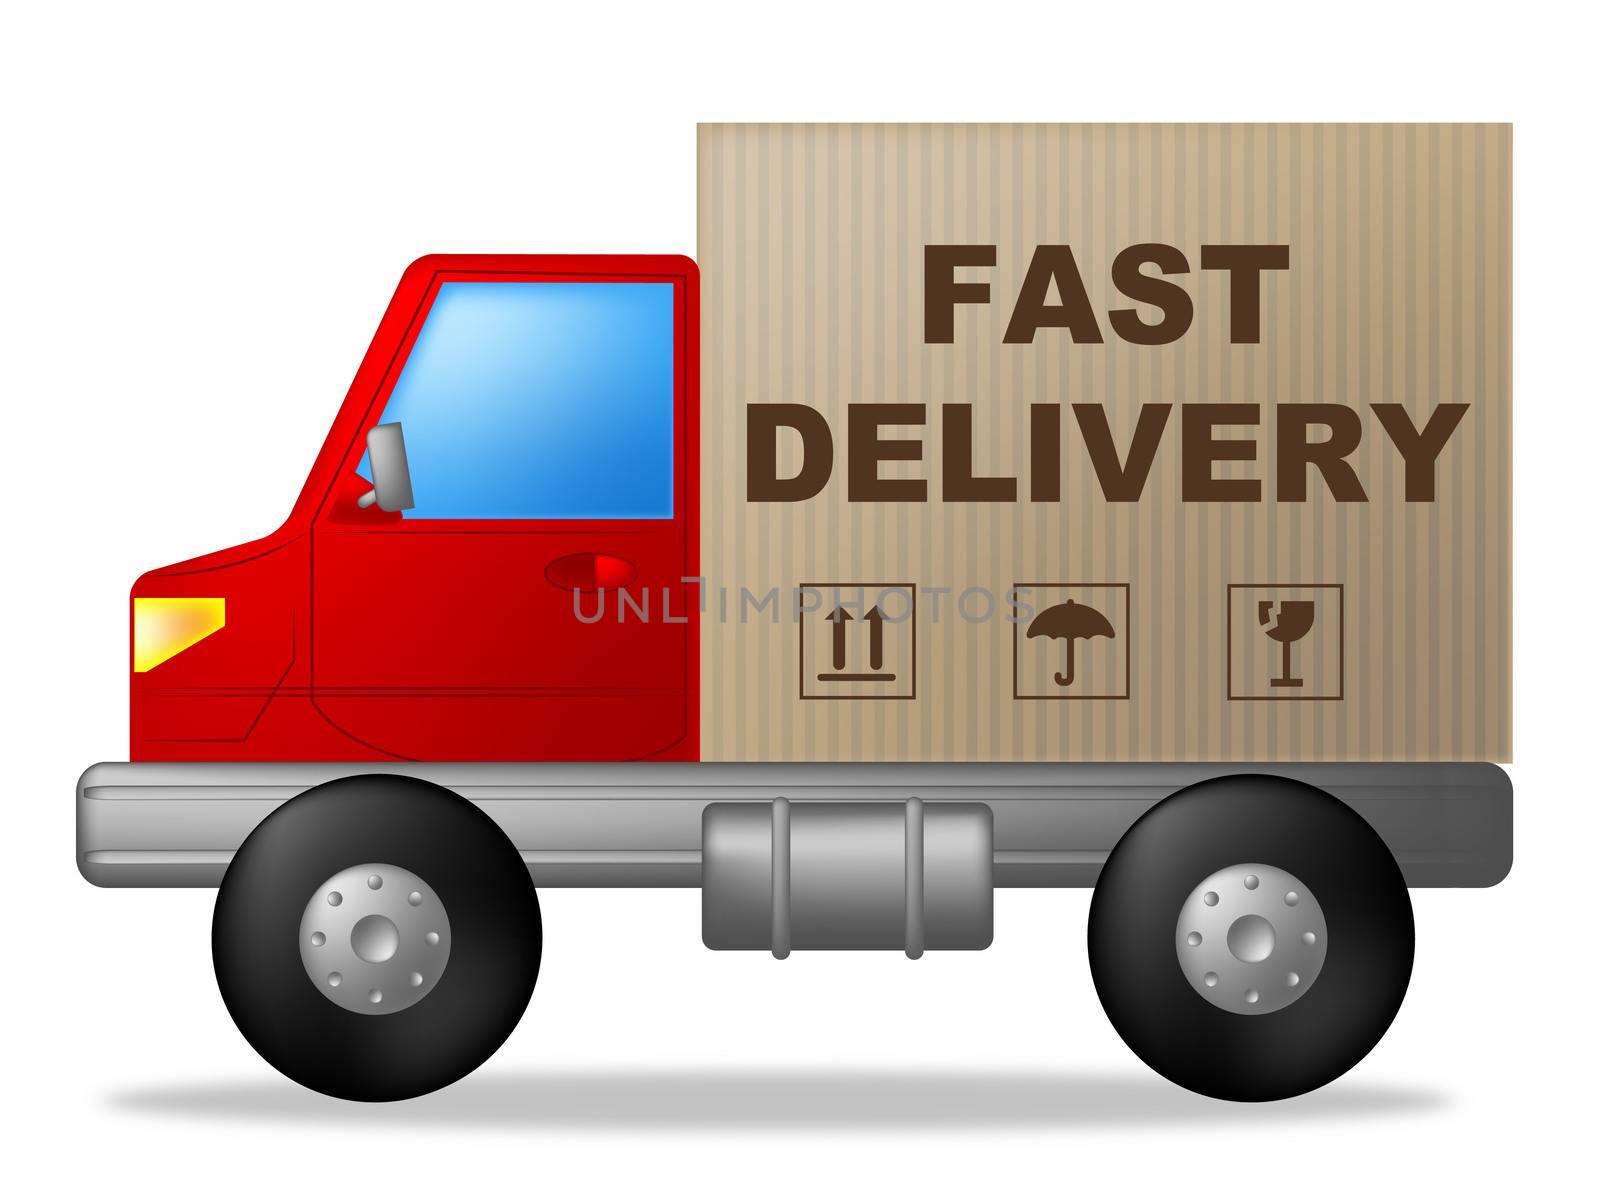 Fast Delivery Representing High Speed And Quickly